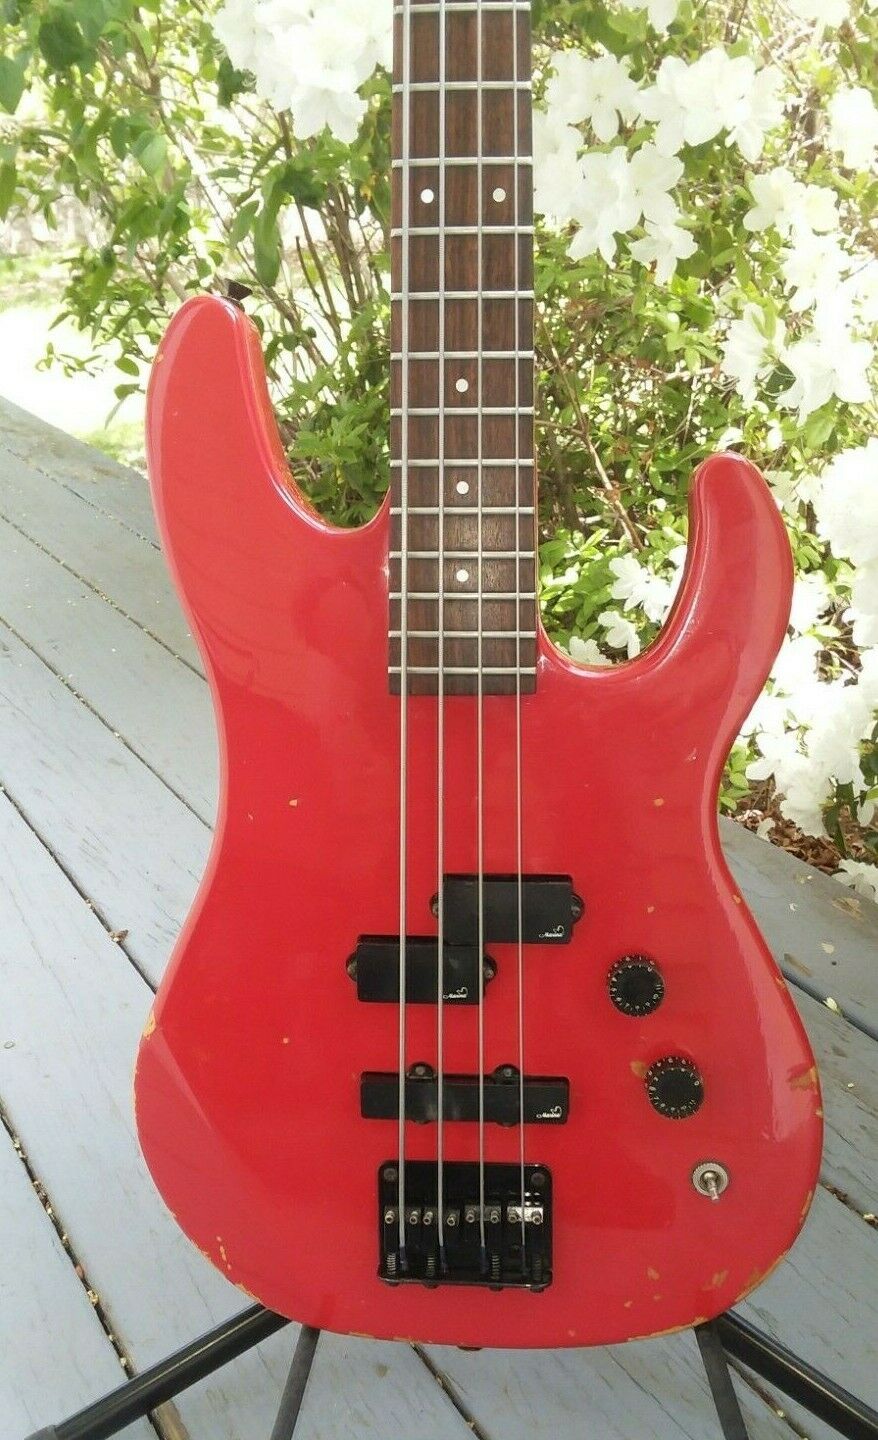 MARINA Concord Version BASS GUITAR - vintage 1980s - red - very nice!